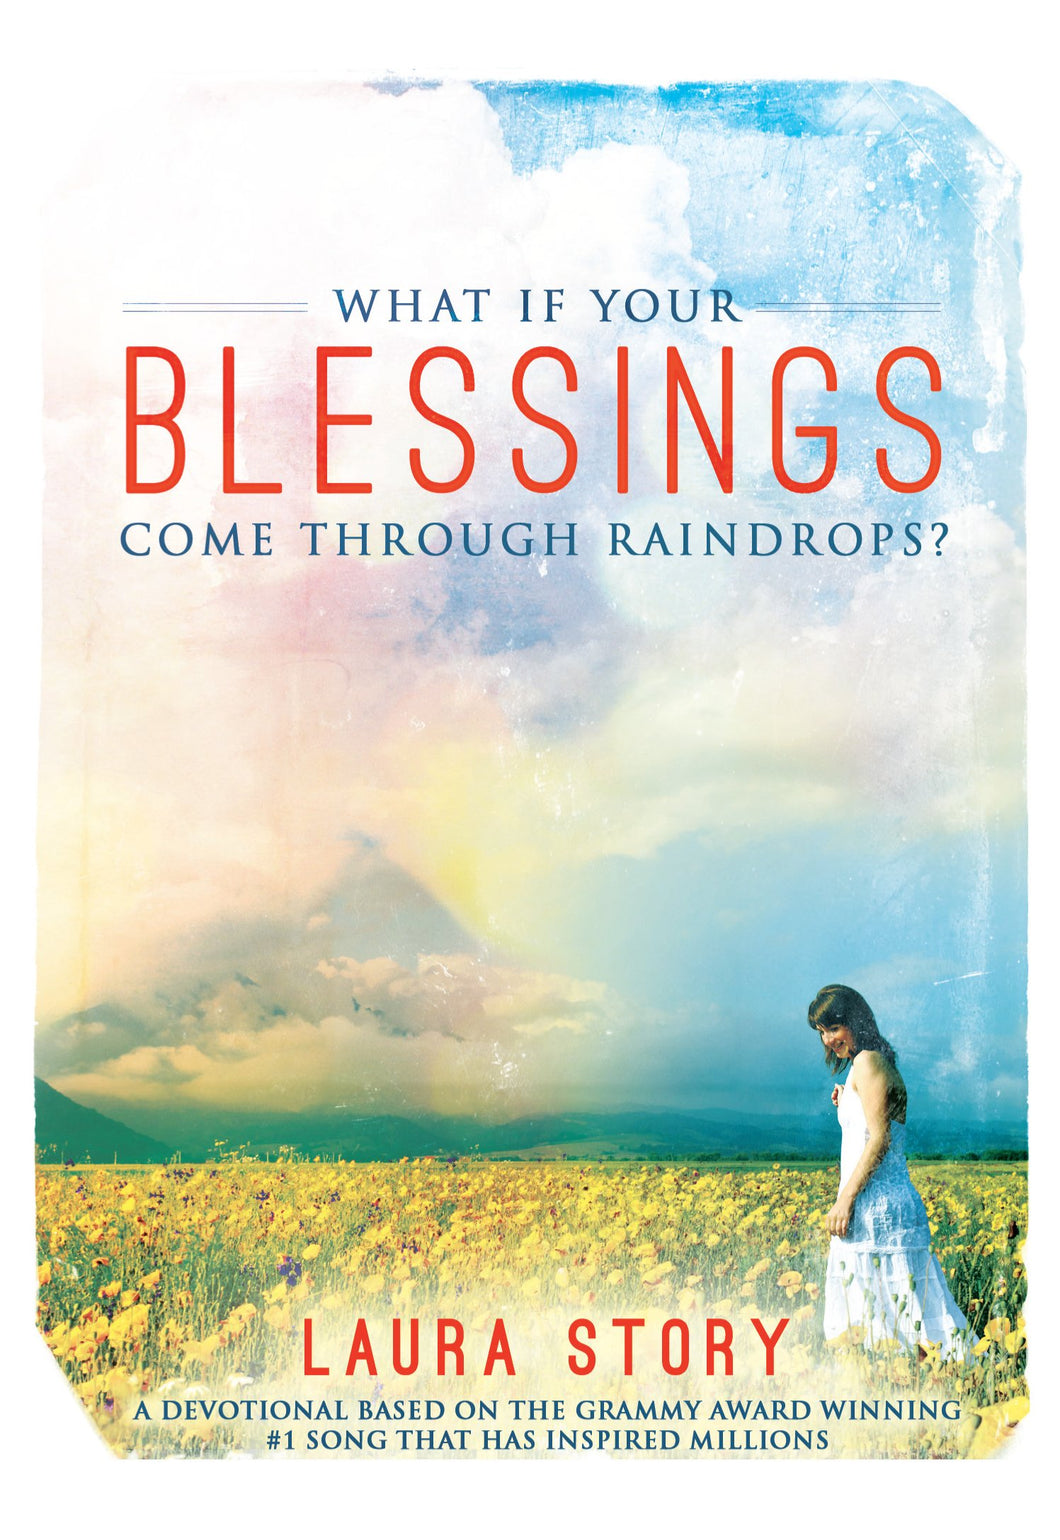 What if Your Blessings Come Through Raindrops? (Laura Story)